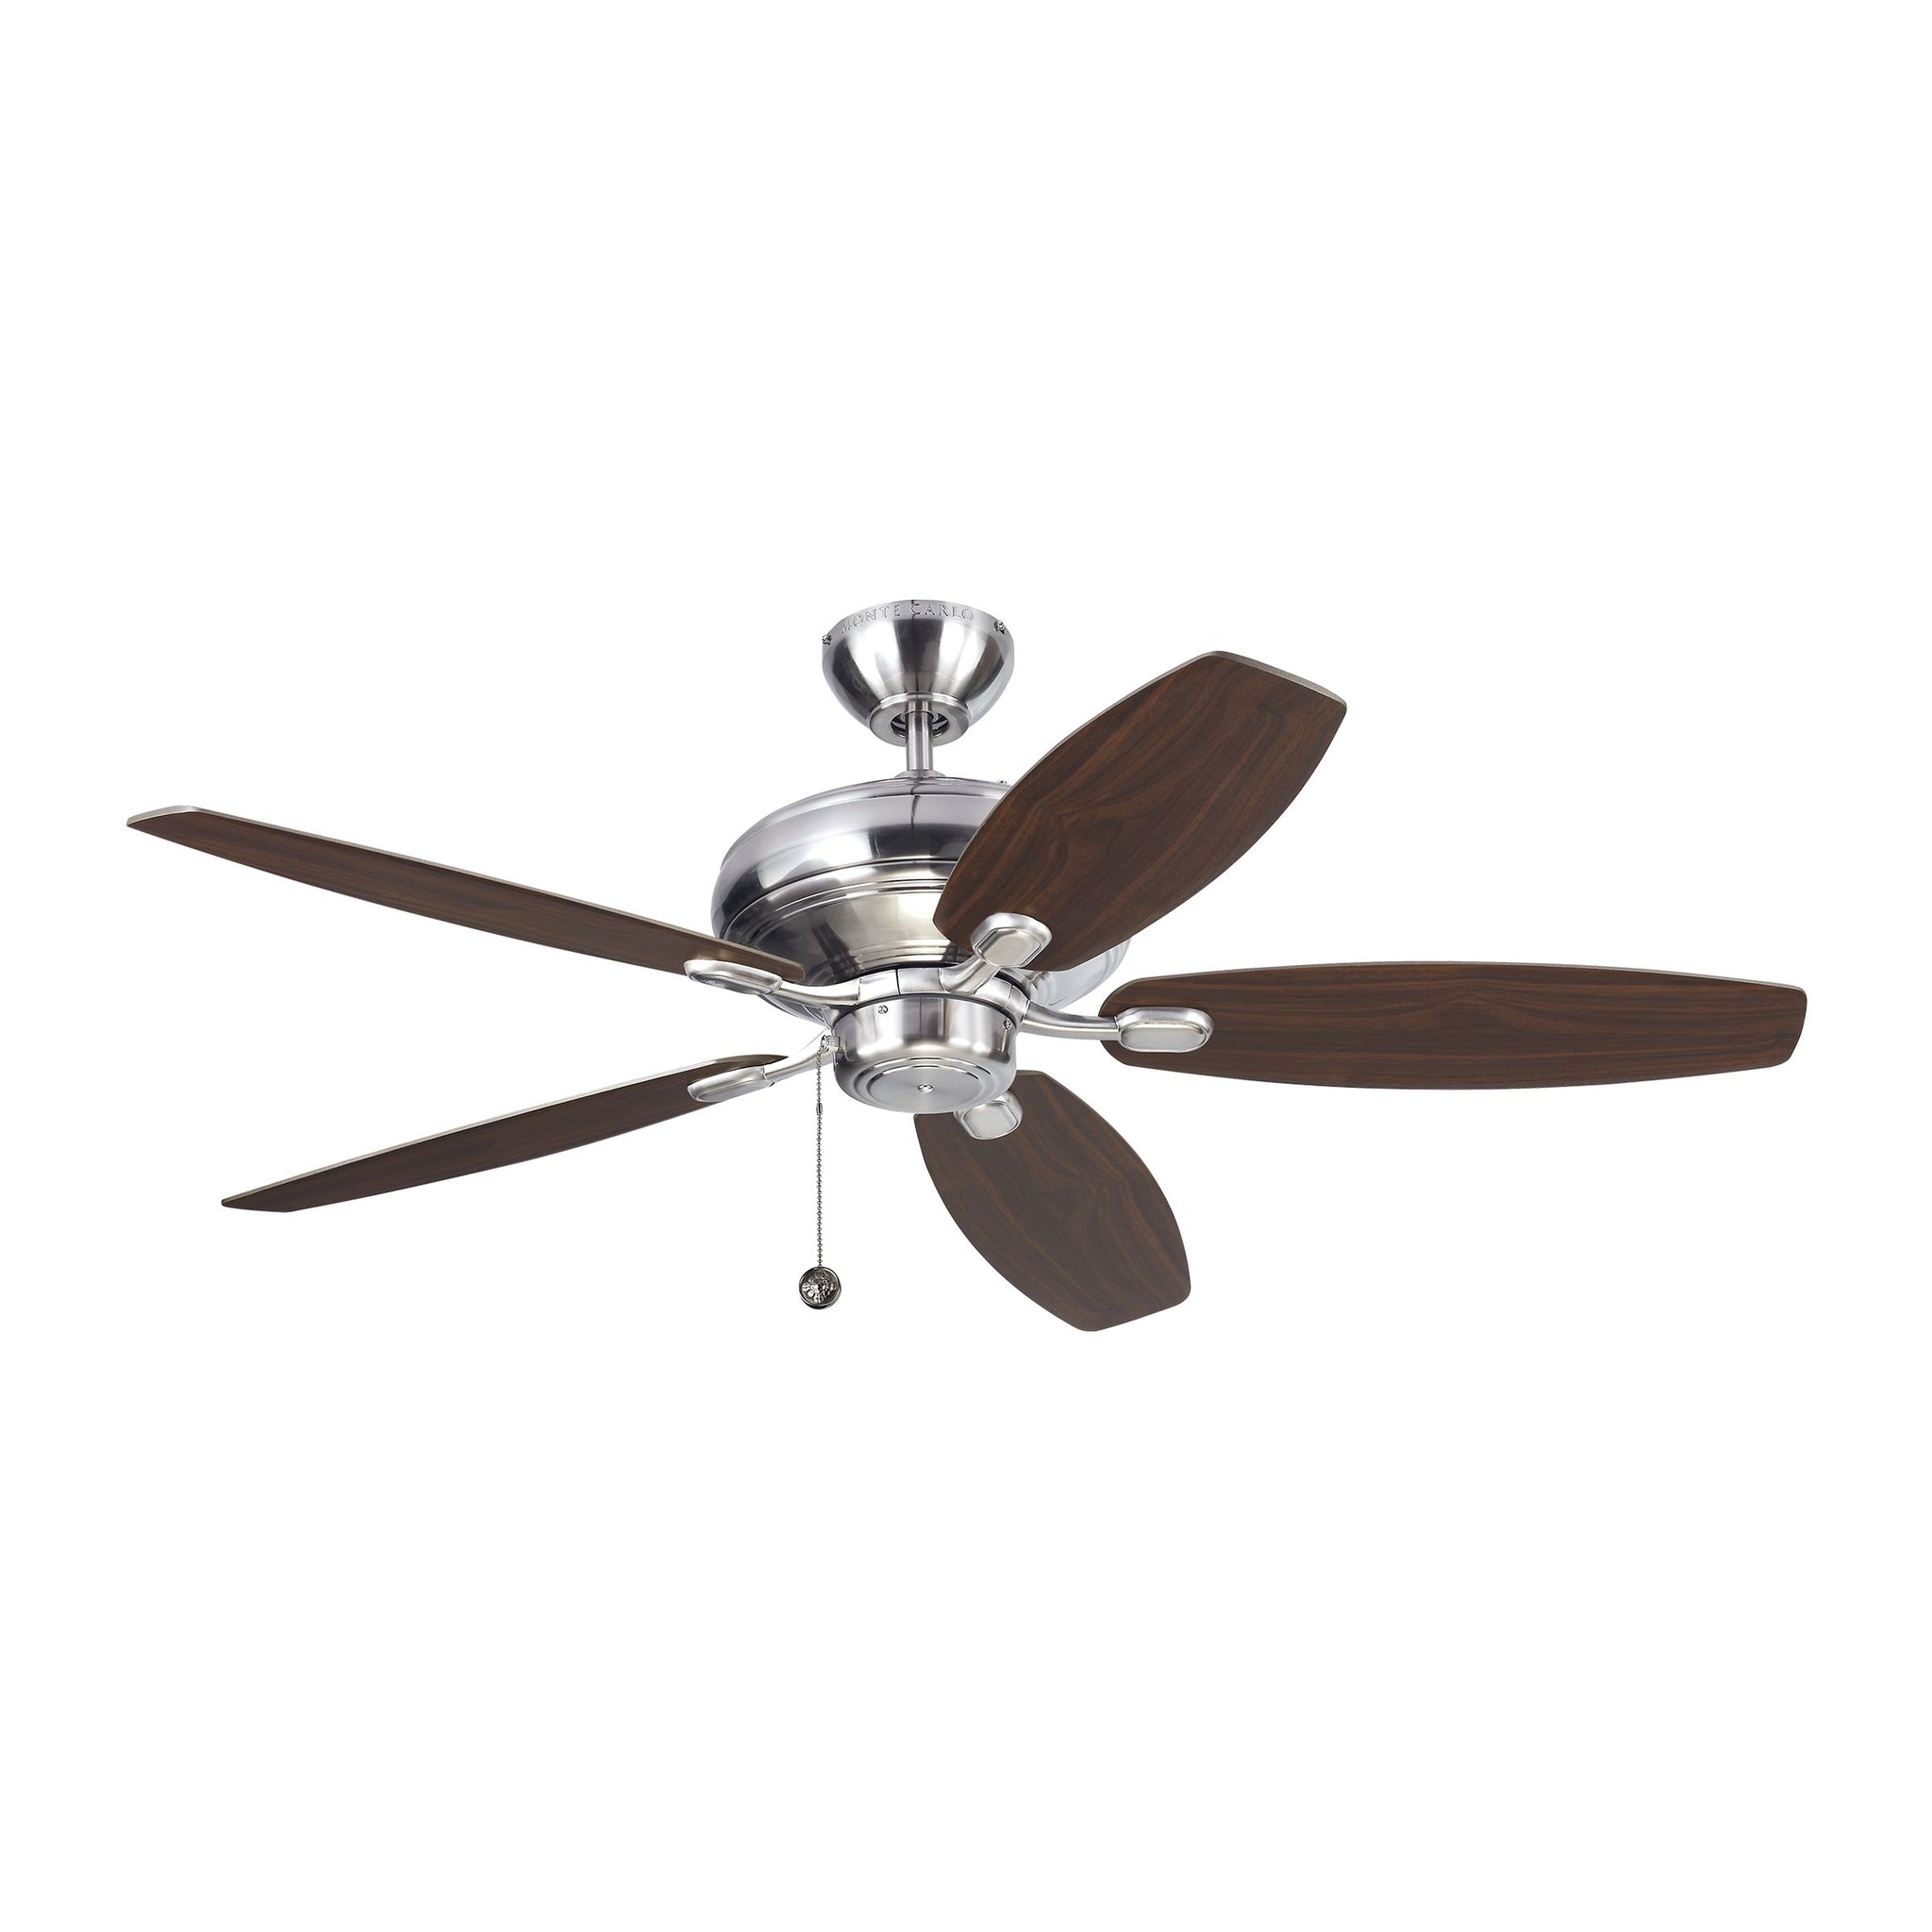 Centro Max Ceiling Fan Brushed Steel